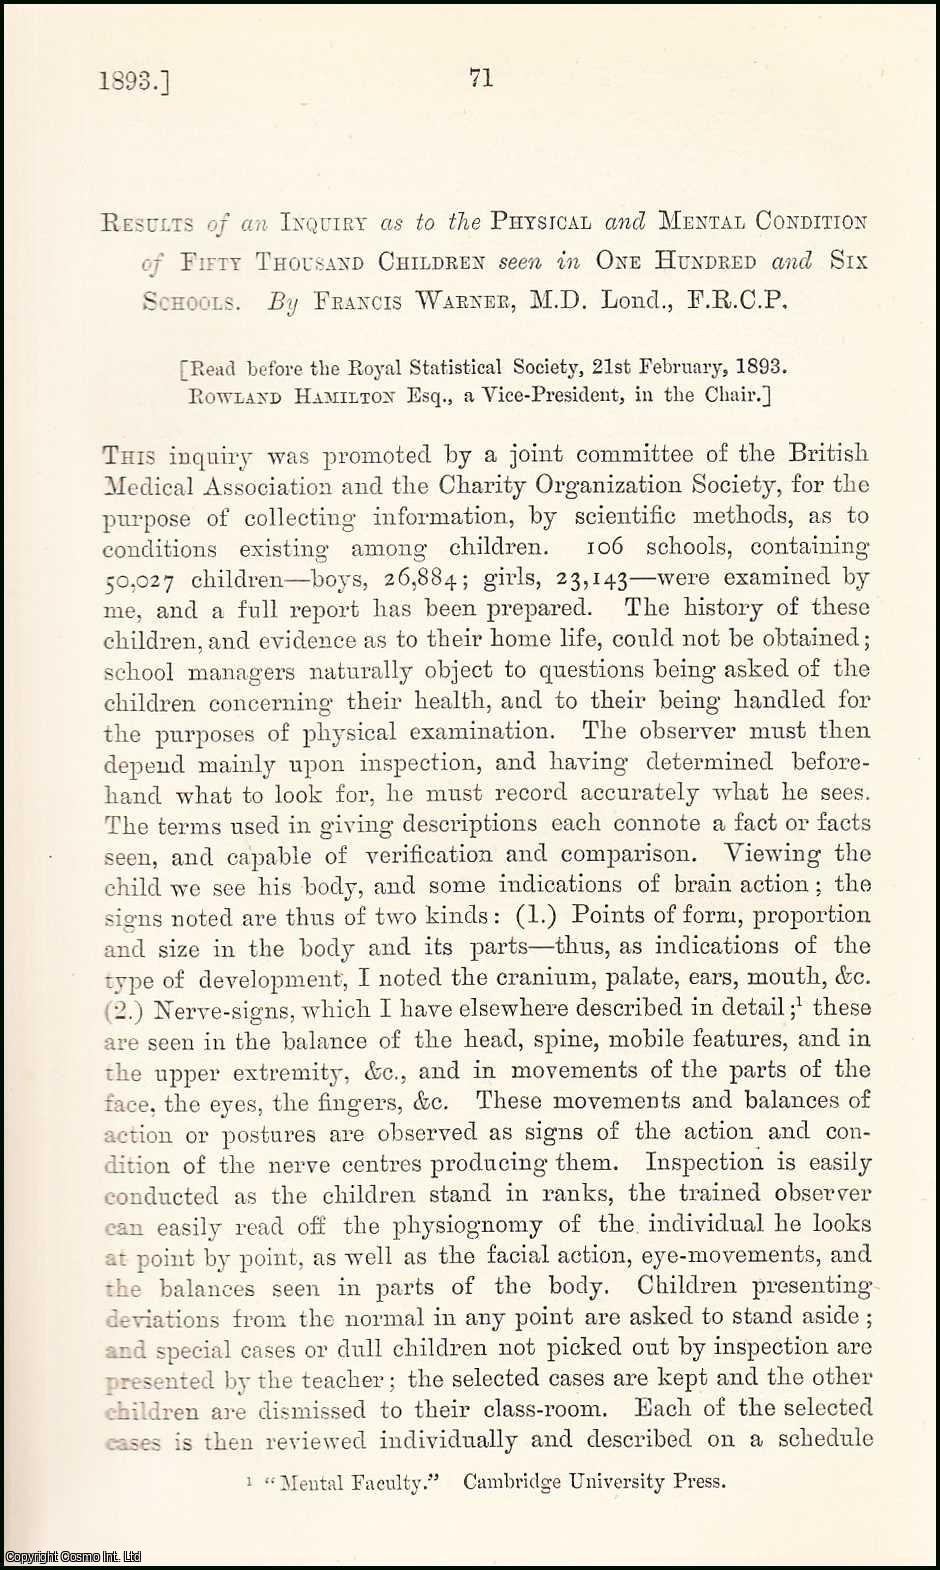 Francis Warner, M.D. Lond., F.R.C.P. - Results of an Inquiry as to the Physical & Mental Condition of Fifty Thousand Children seen in One Hundred & Six Schools. An uncommon original article from the Journal of the Royal Statistical Society of London, 1893.